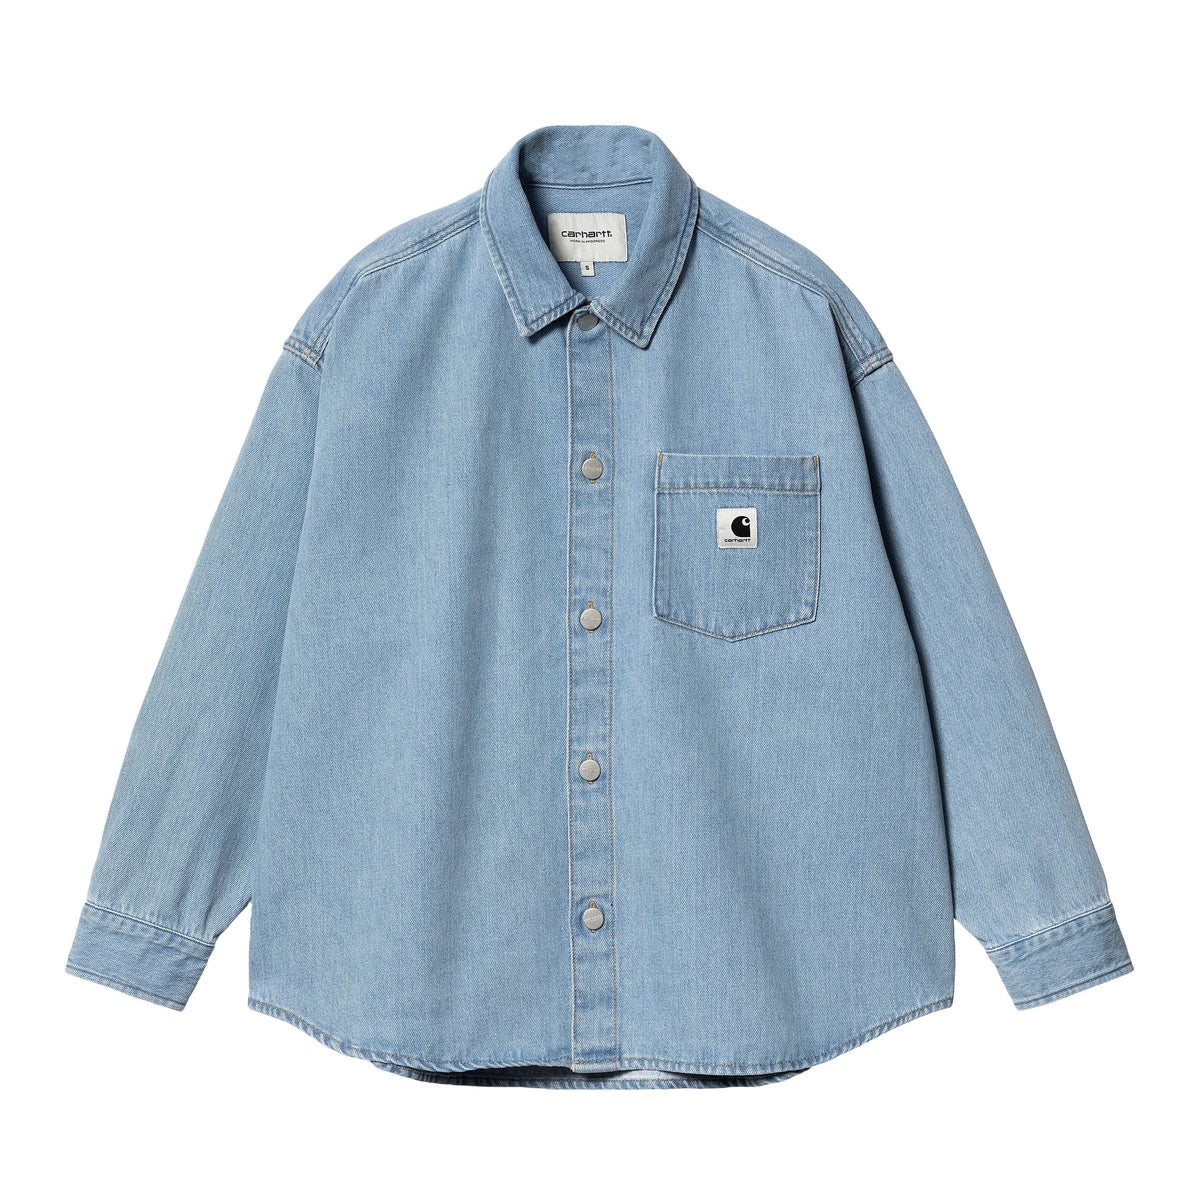 Carhartt Wip Giacca jeans Donna Alta Shirt